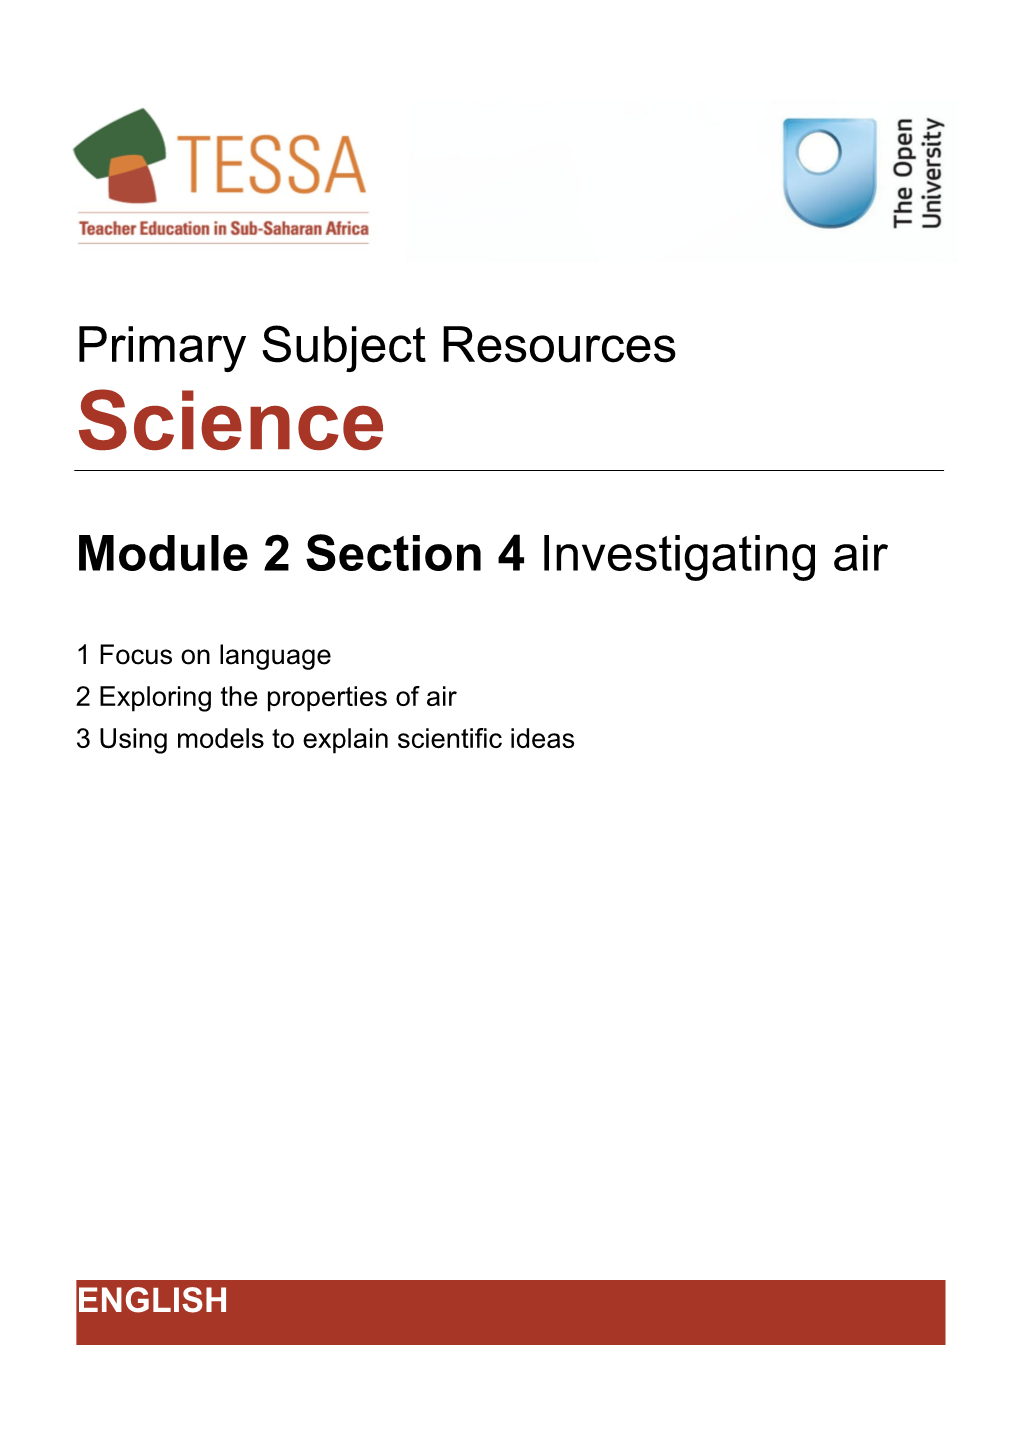 Section 4 : Investigating Air